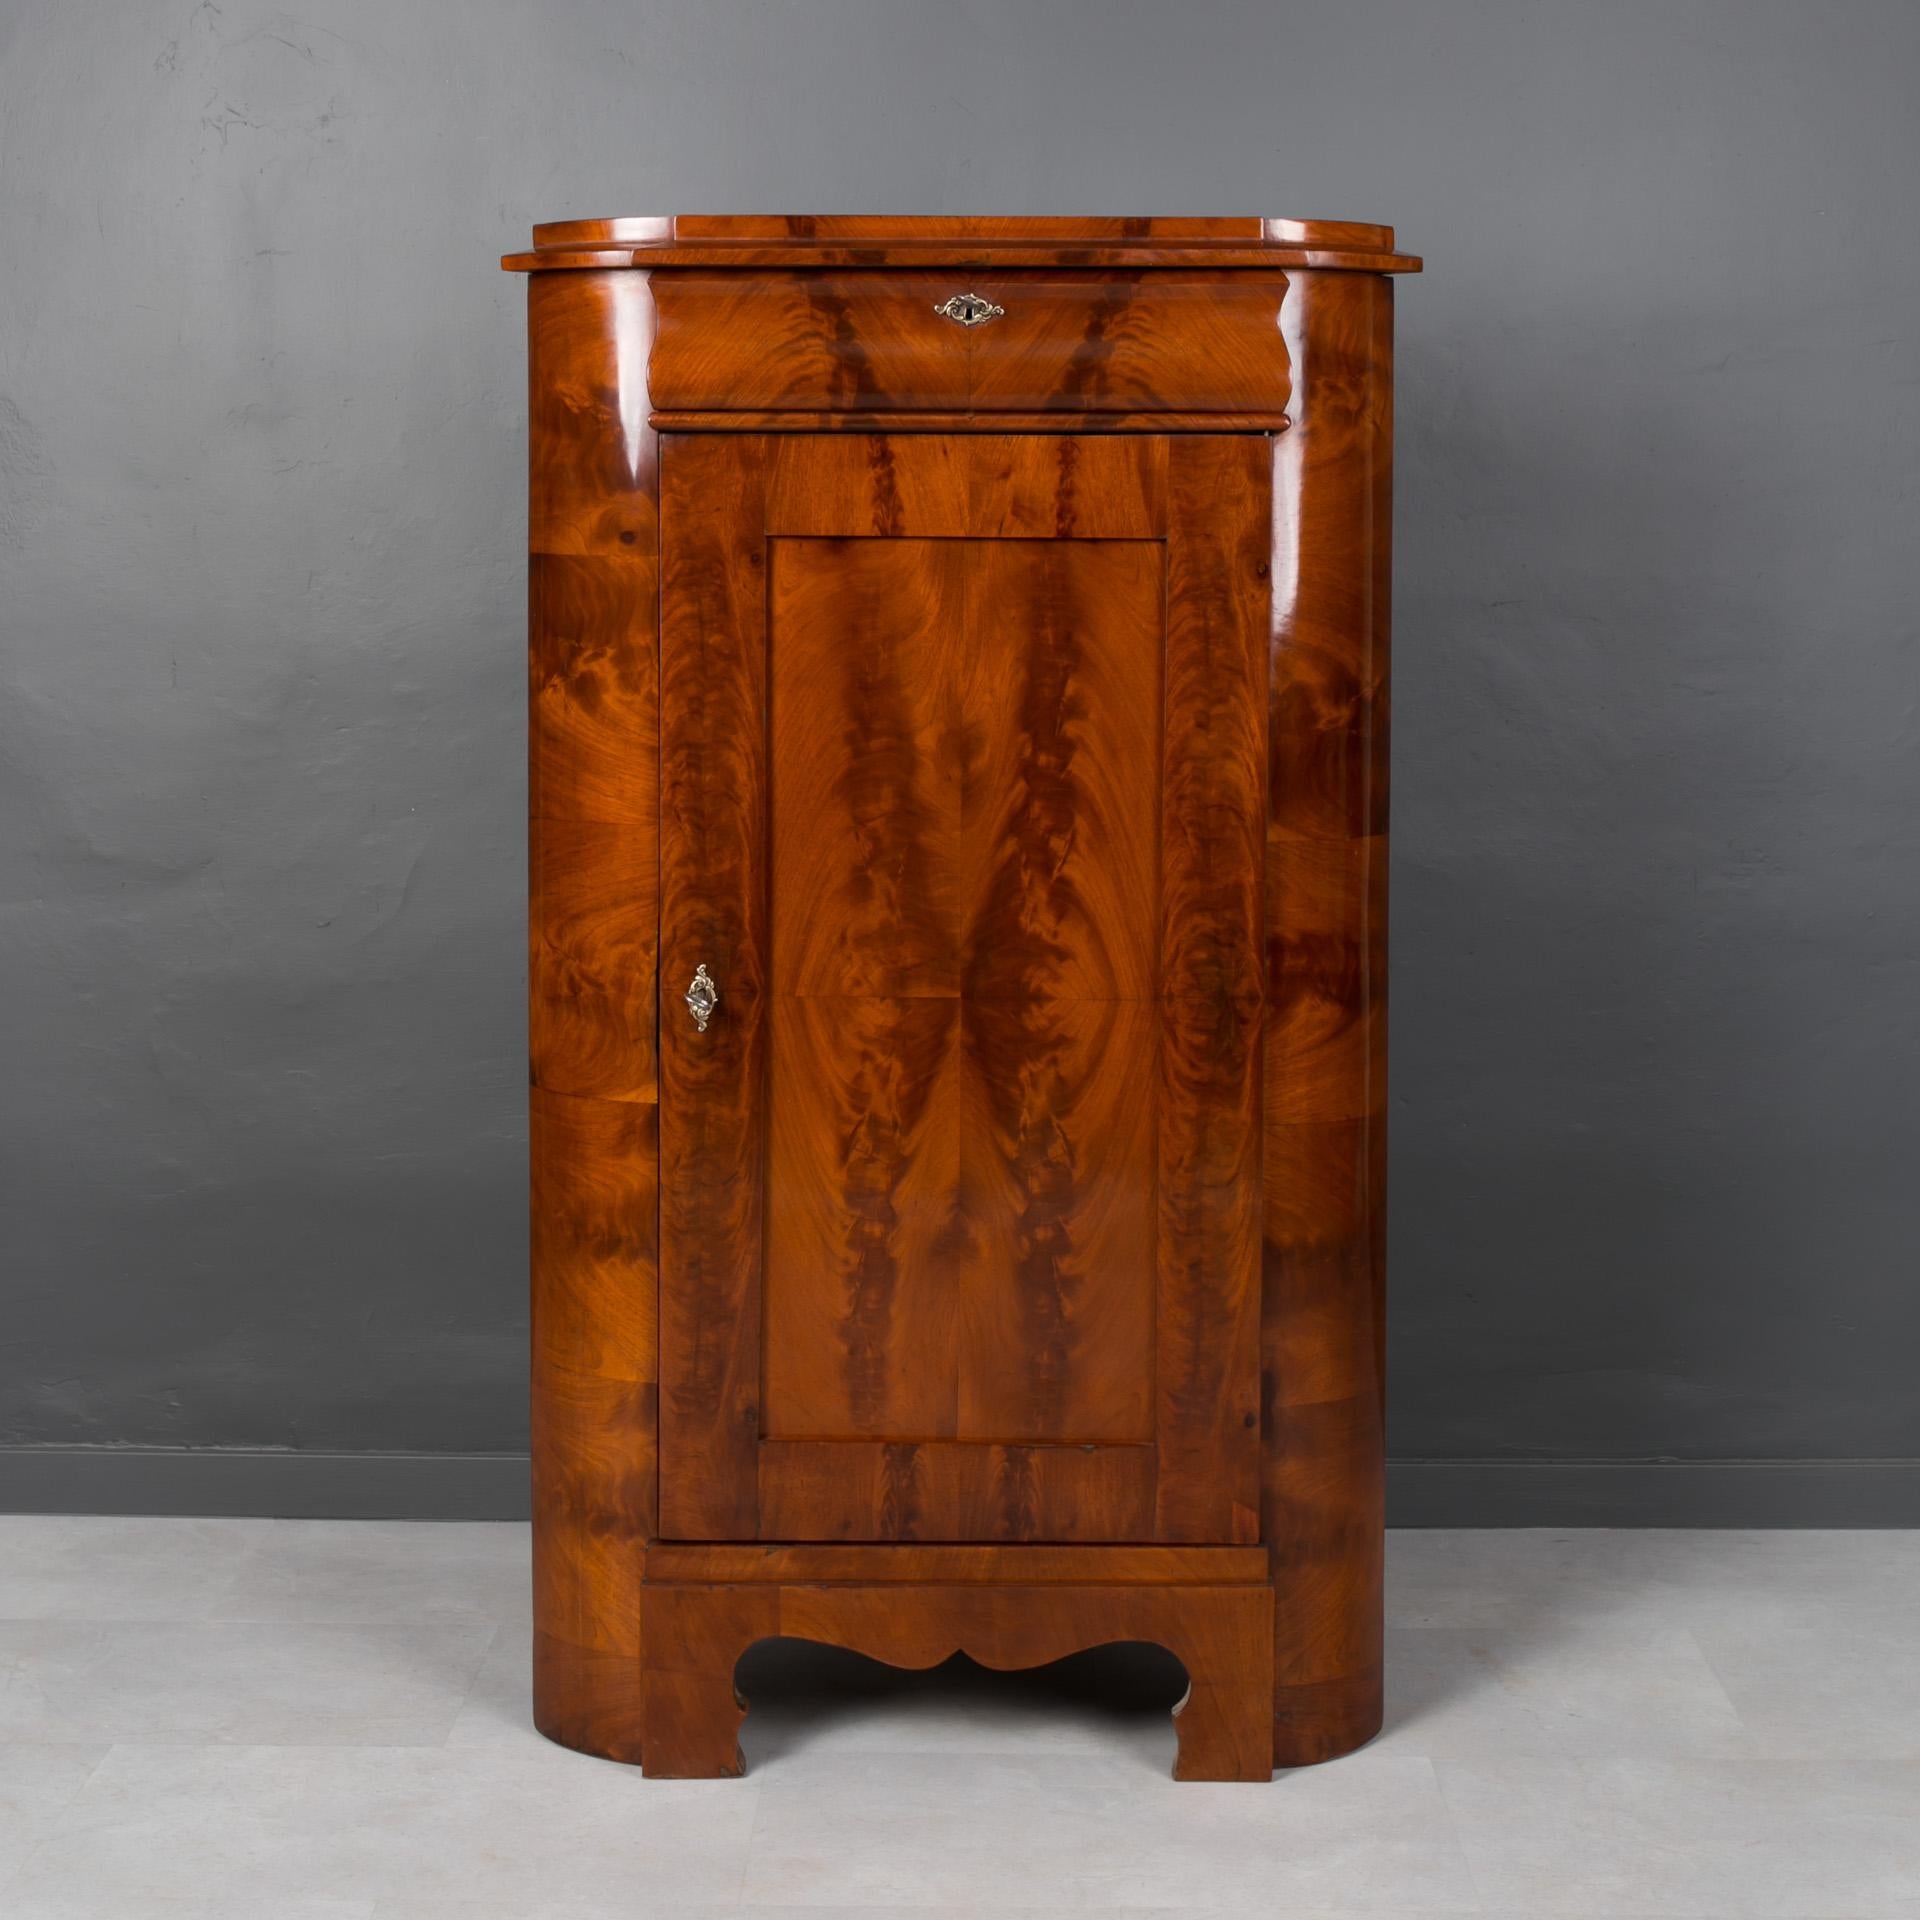 Biedermeier corner cabinet from 19th century. It comes from France most probably. It is made of pine wood, veneered with beautiful pyramidal mahogany. It features two shelves and a drawer, lockable with a key. It has undergone a careful renovation